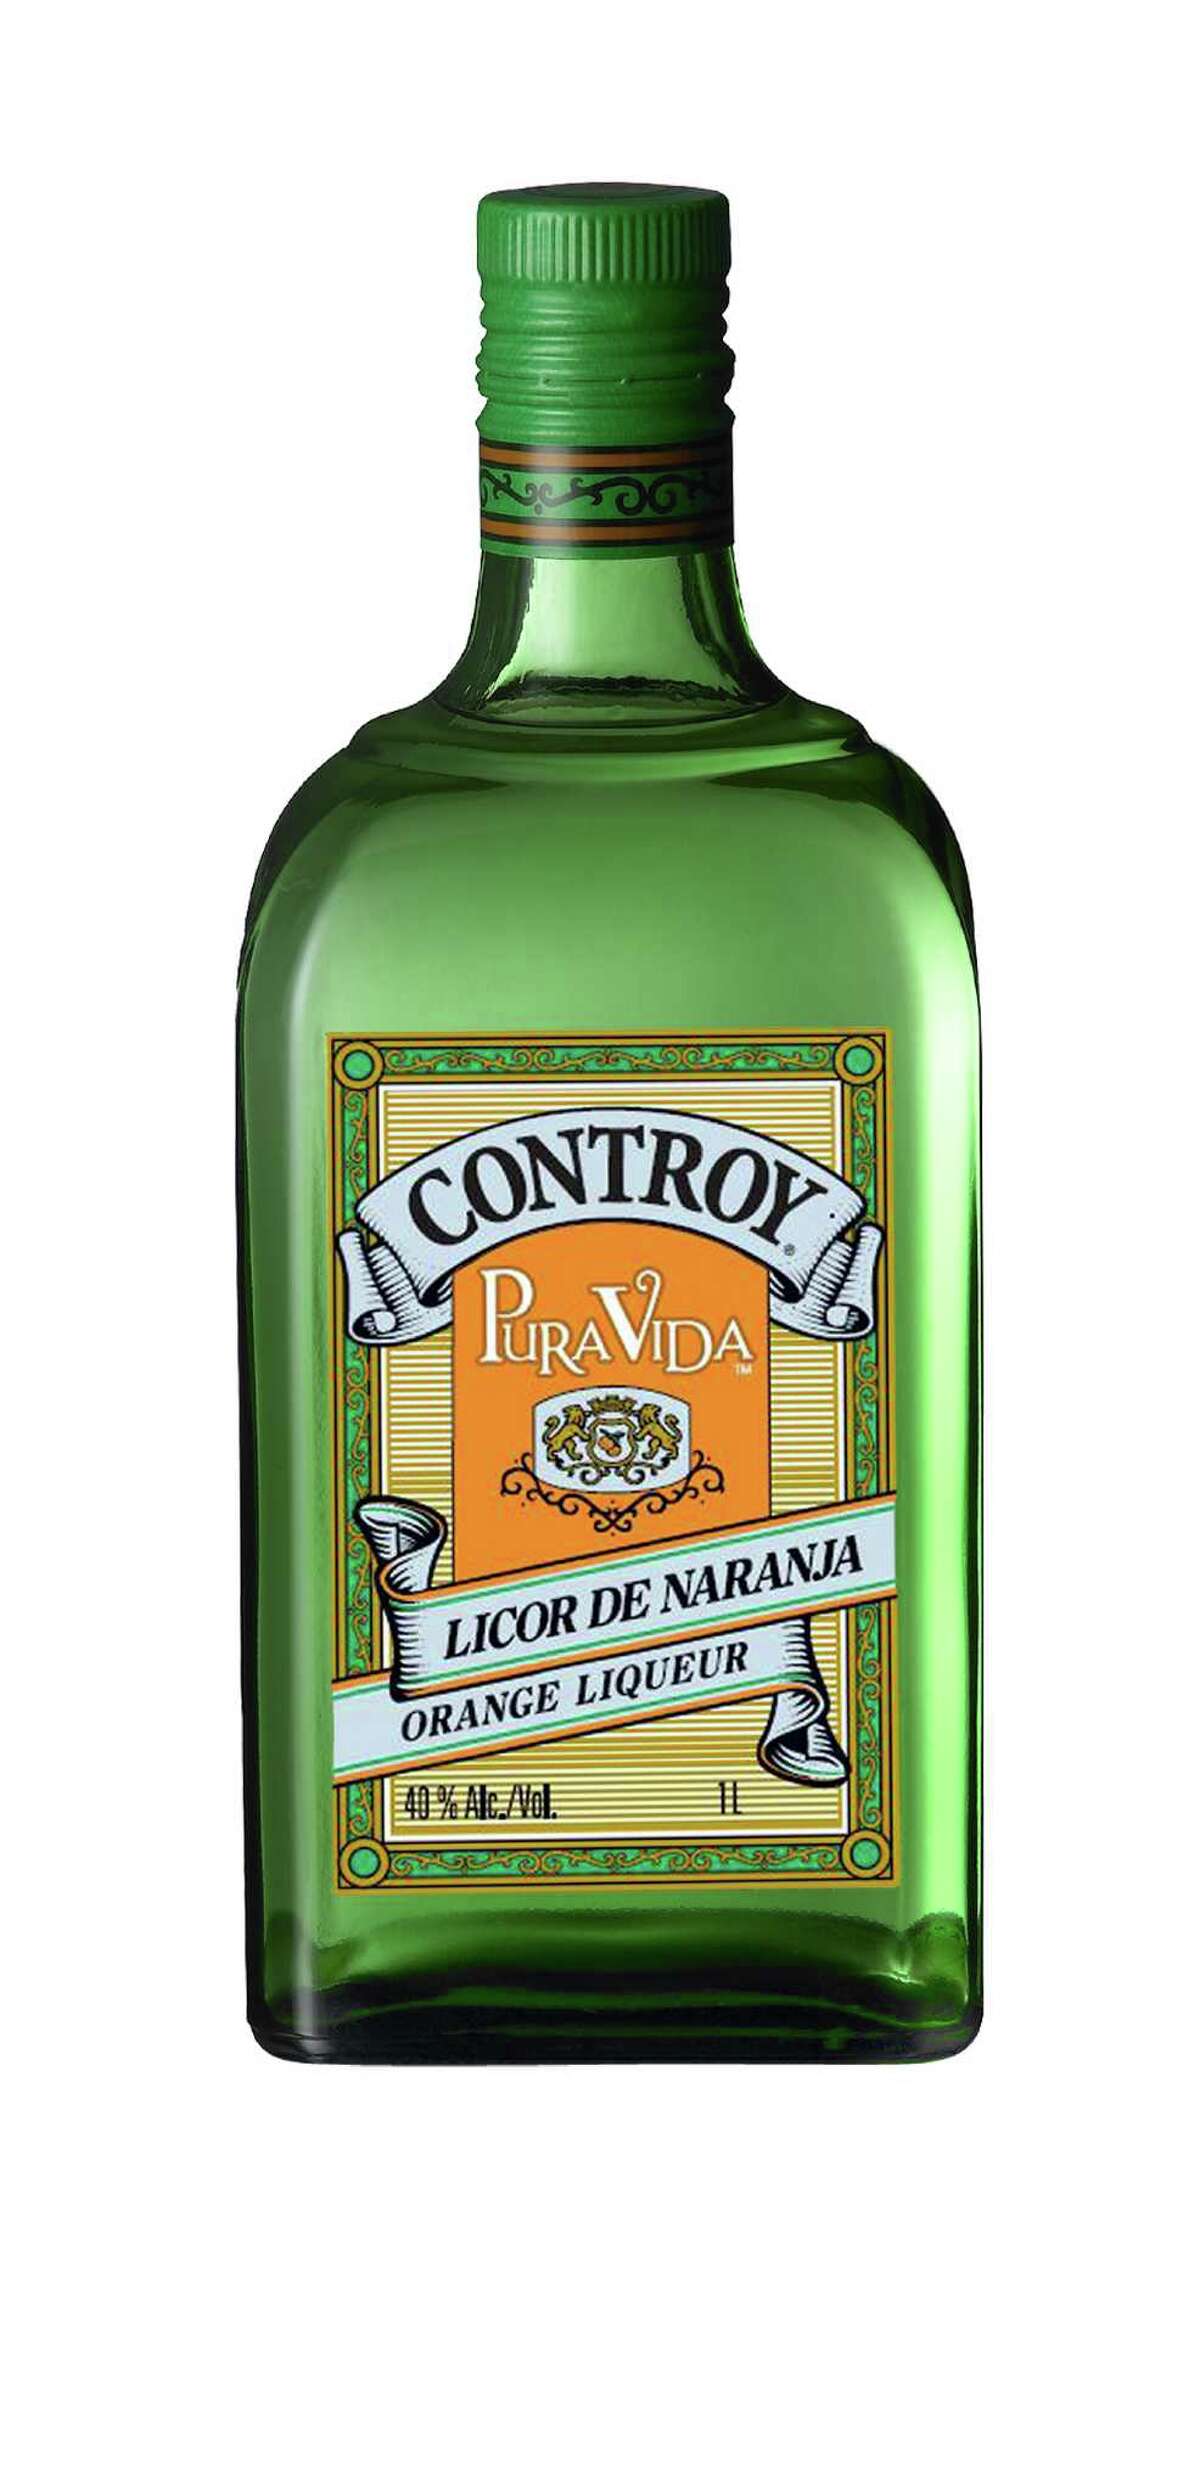 Controy, a Mexican orange liqueur, is now available in the United States. Imported by Pura Vida tequila.